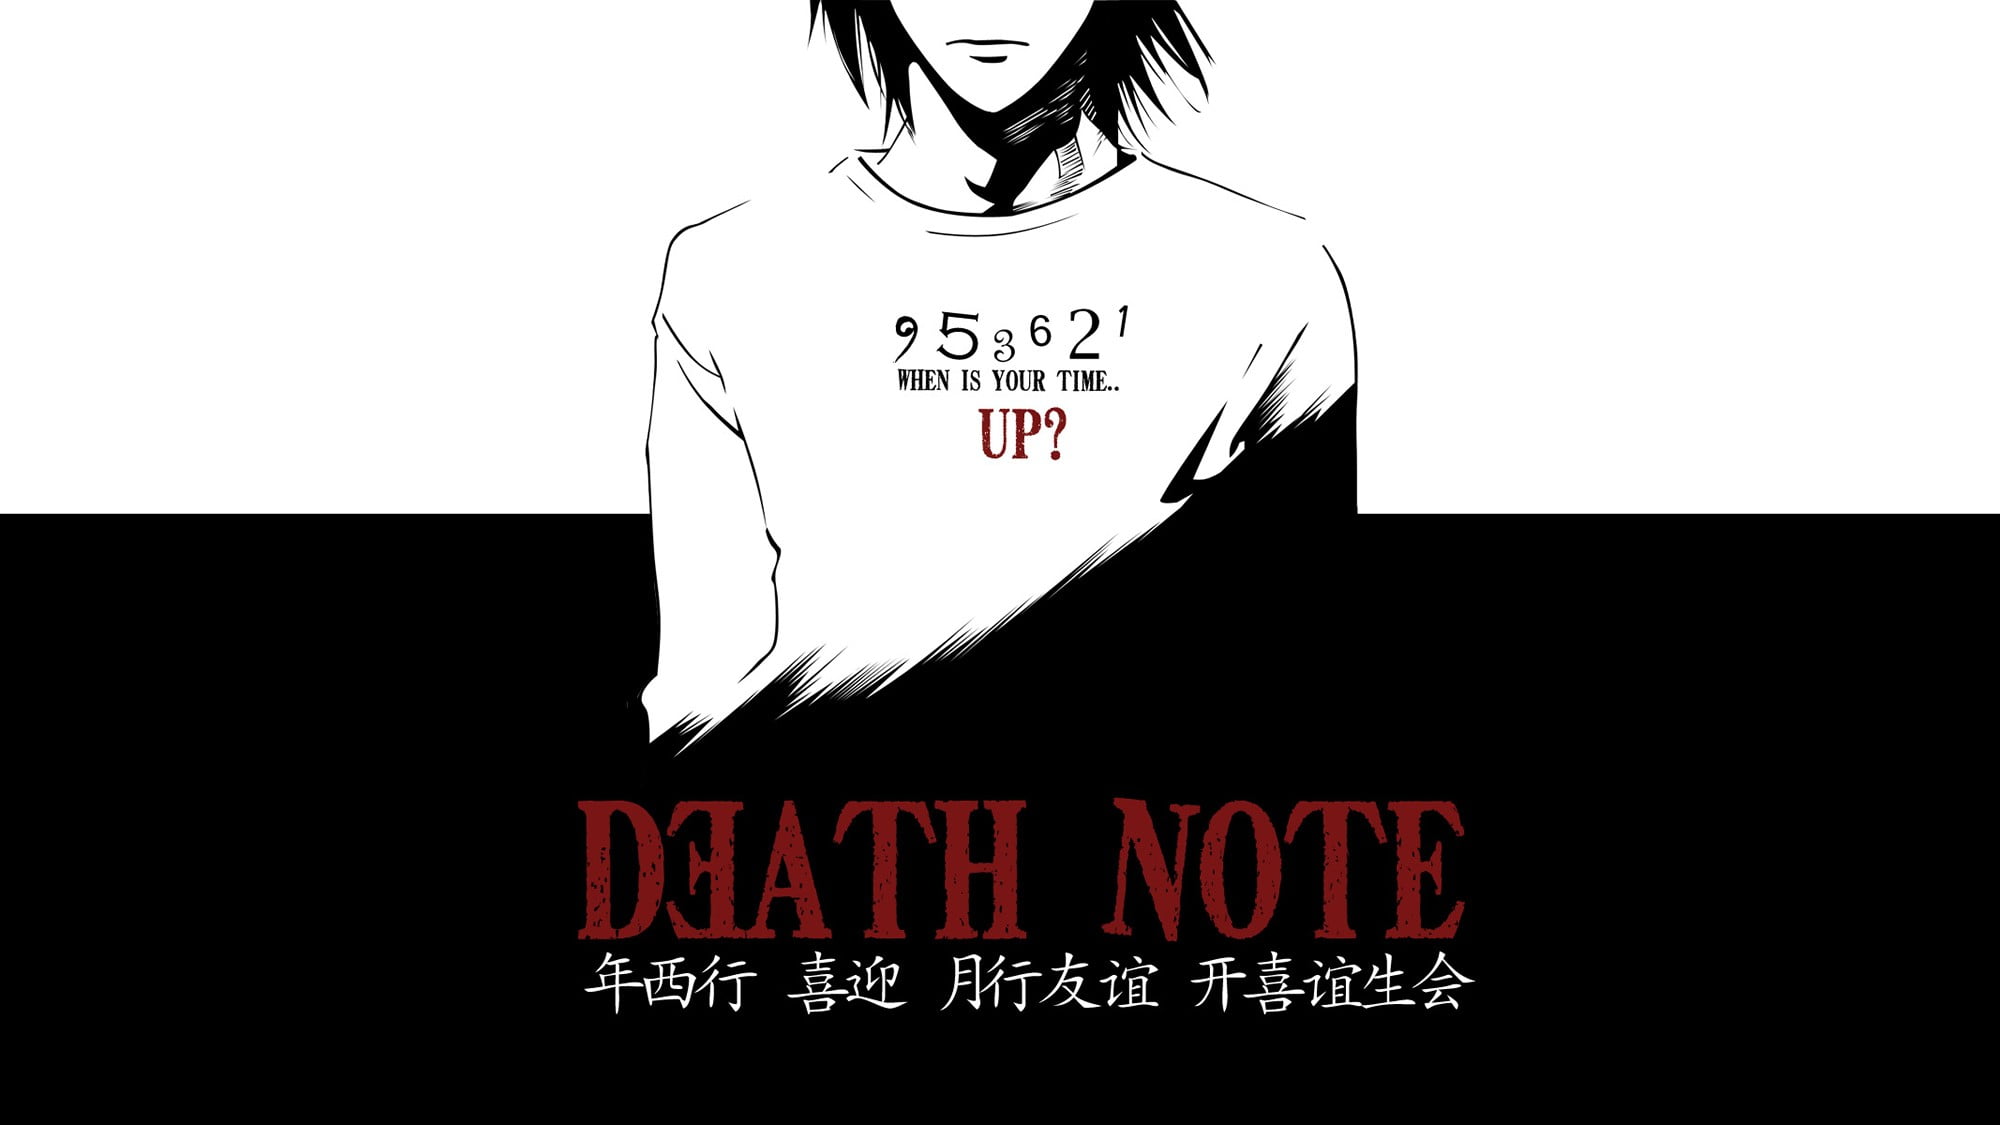 Pin on Death note